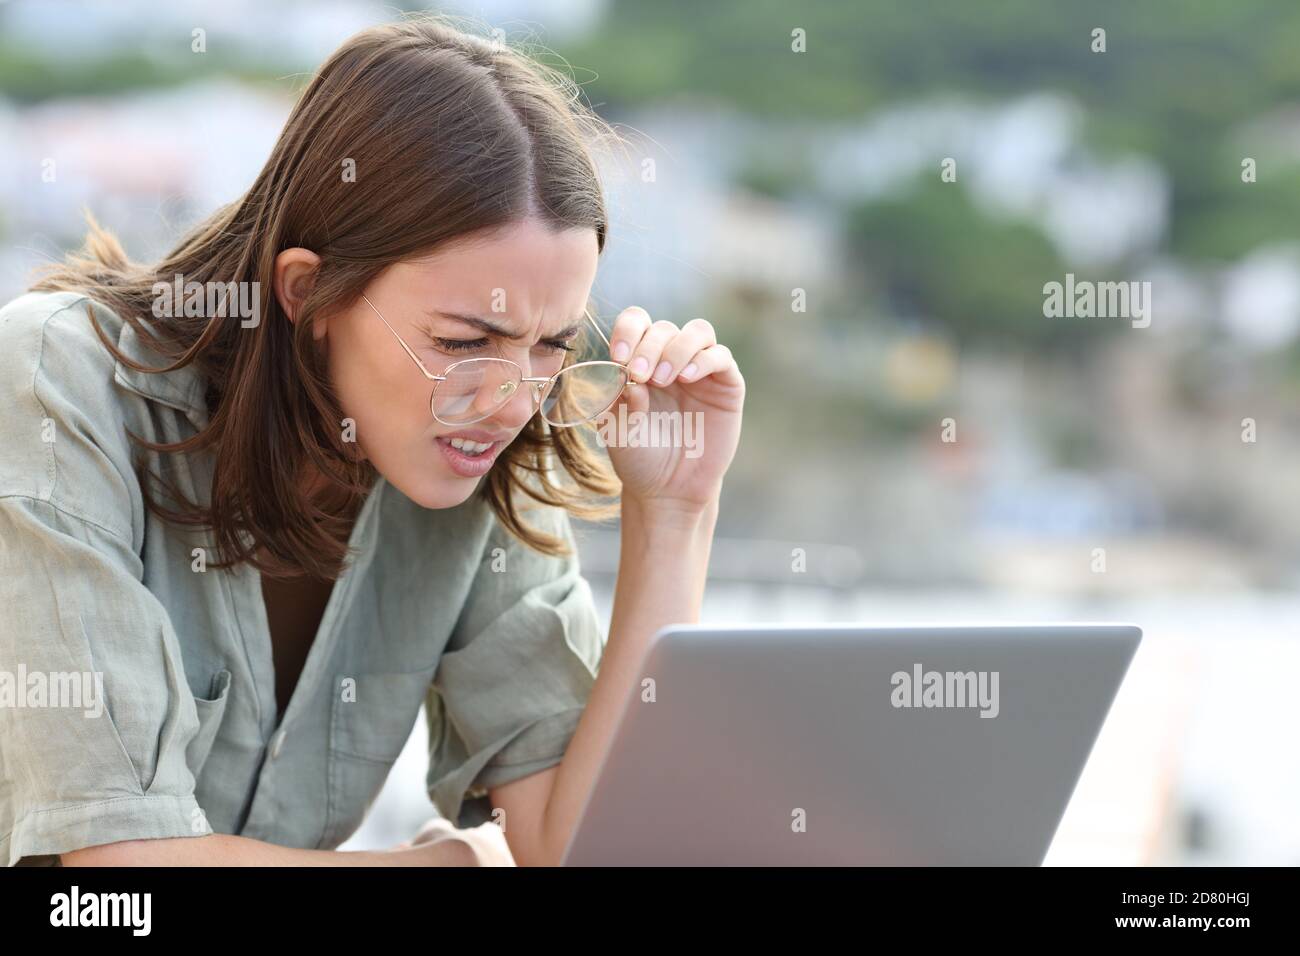 Stressed woman forcing sight wearing eyeglasees reading laptop outdoors Stock Photo